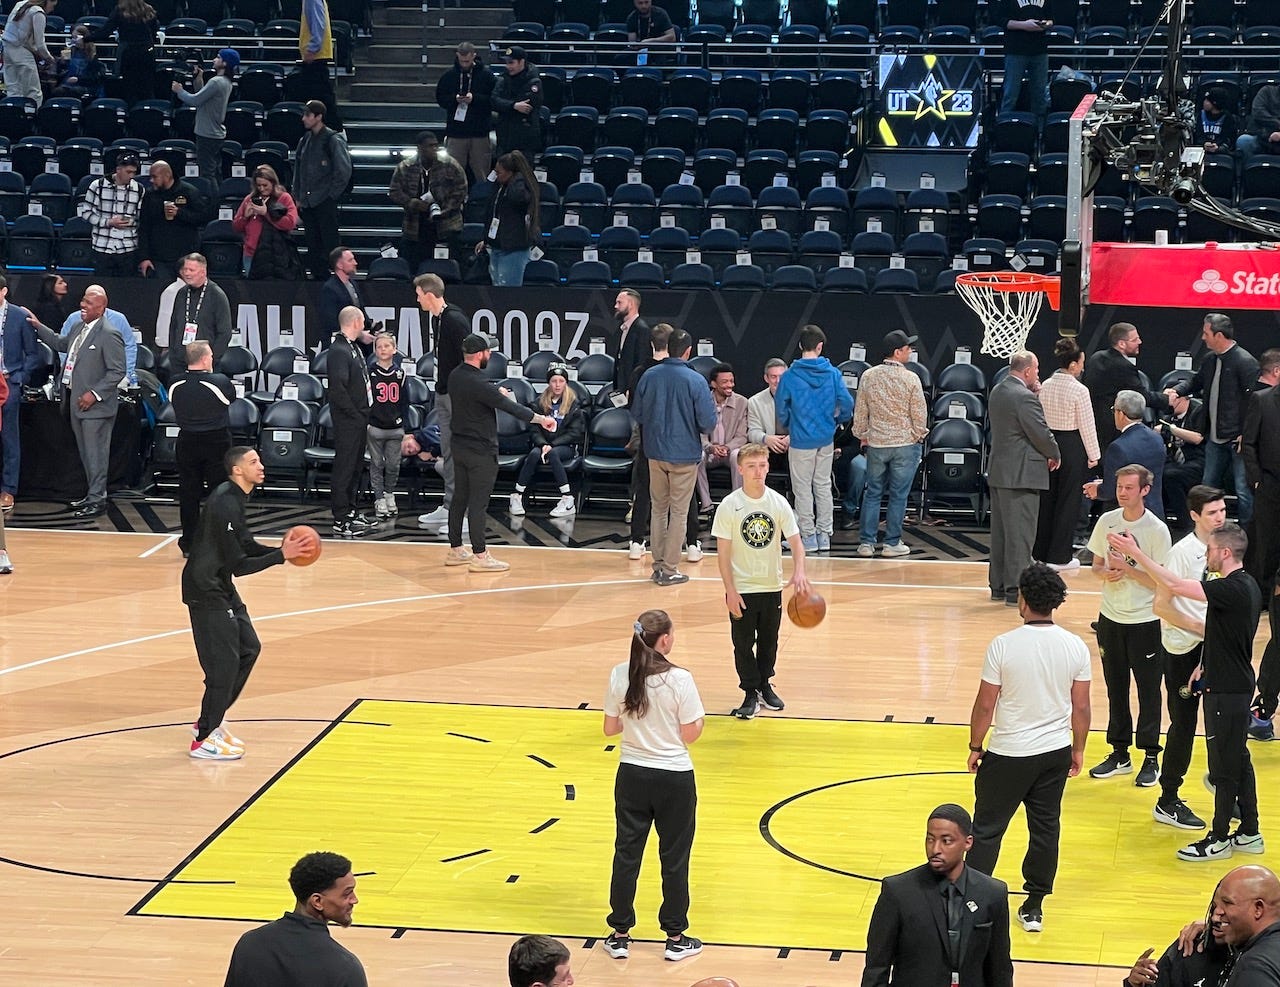 Tyrese Haliburton was one of the first players on the court Sunday at Vivint Arena.